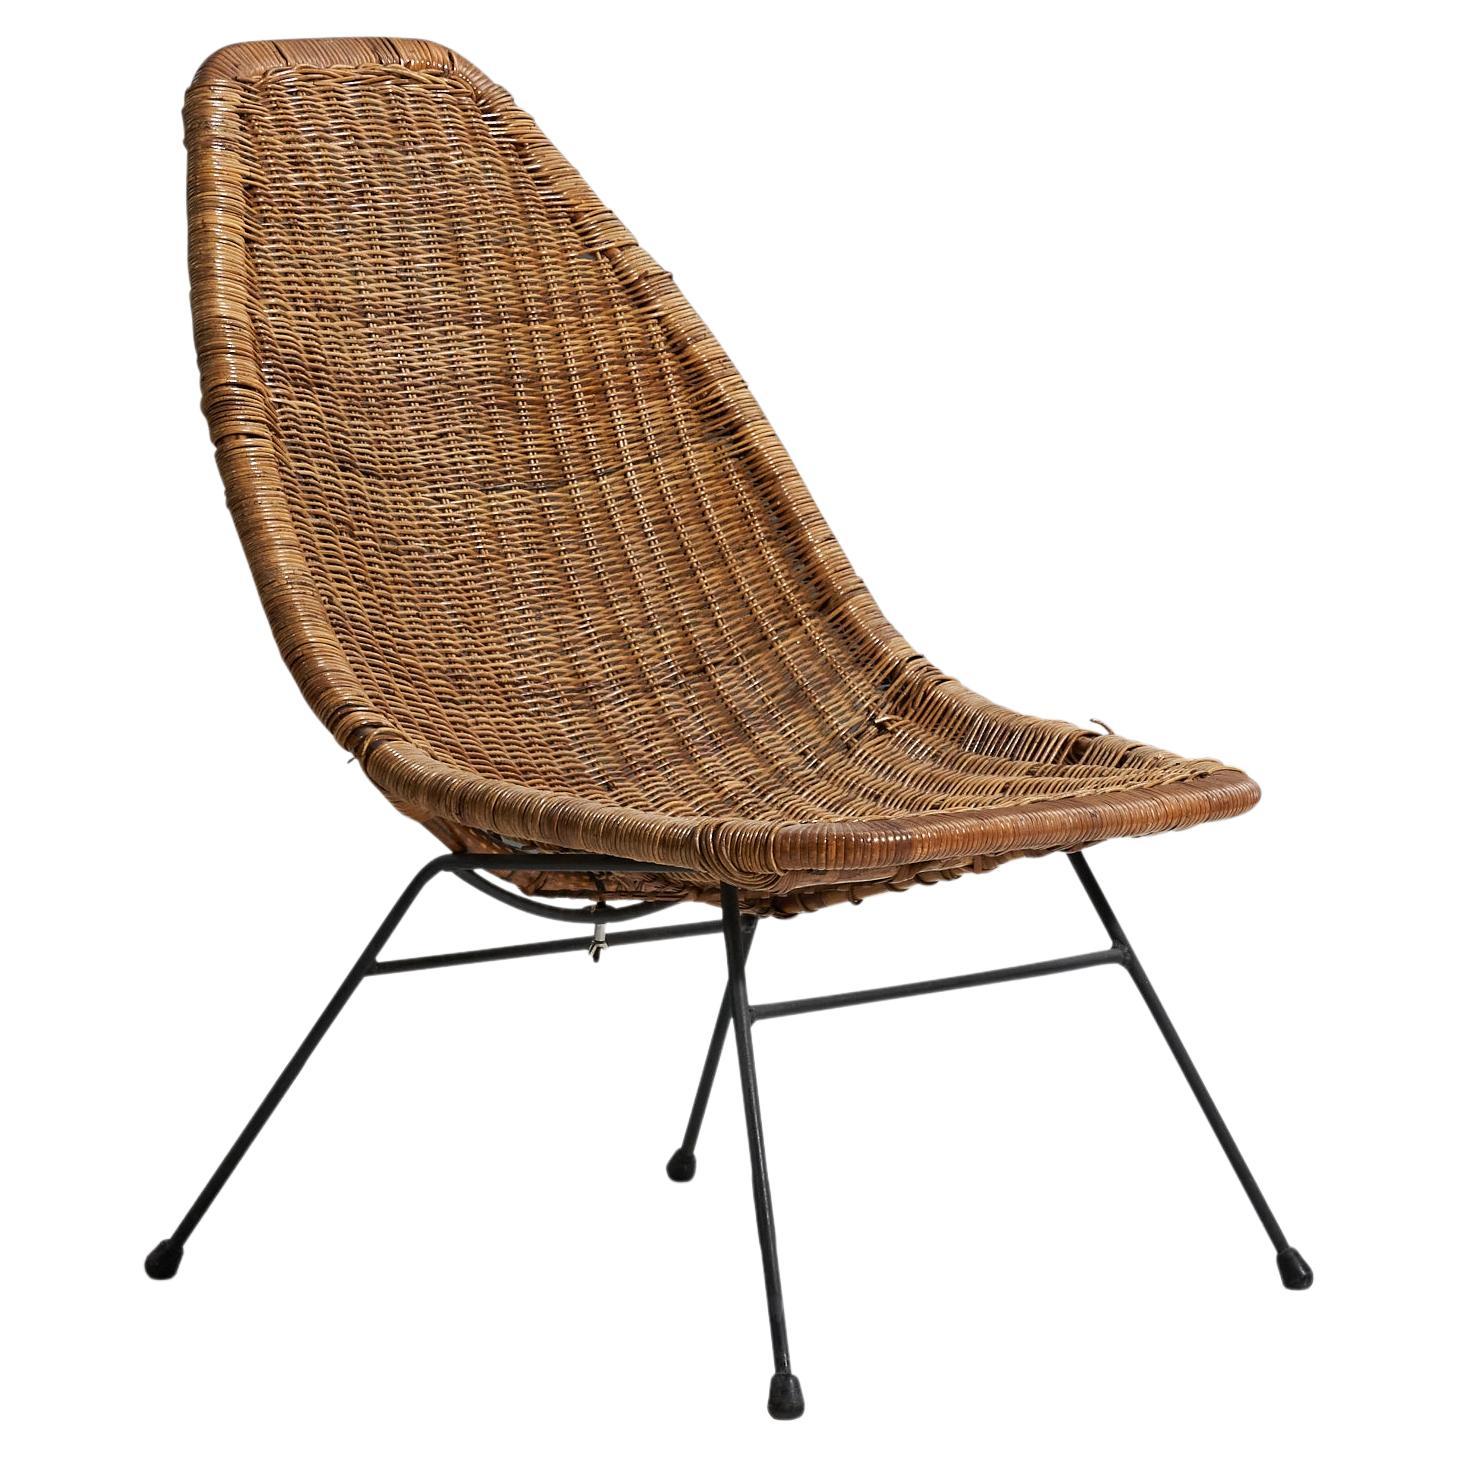 American Designer, Lounge Chair, Rattan, Metal, United States, 1950s For Sale